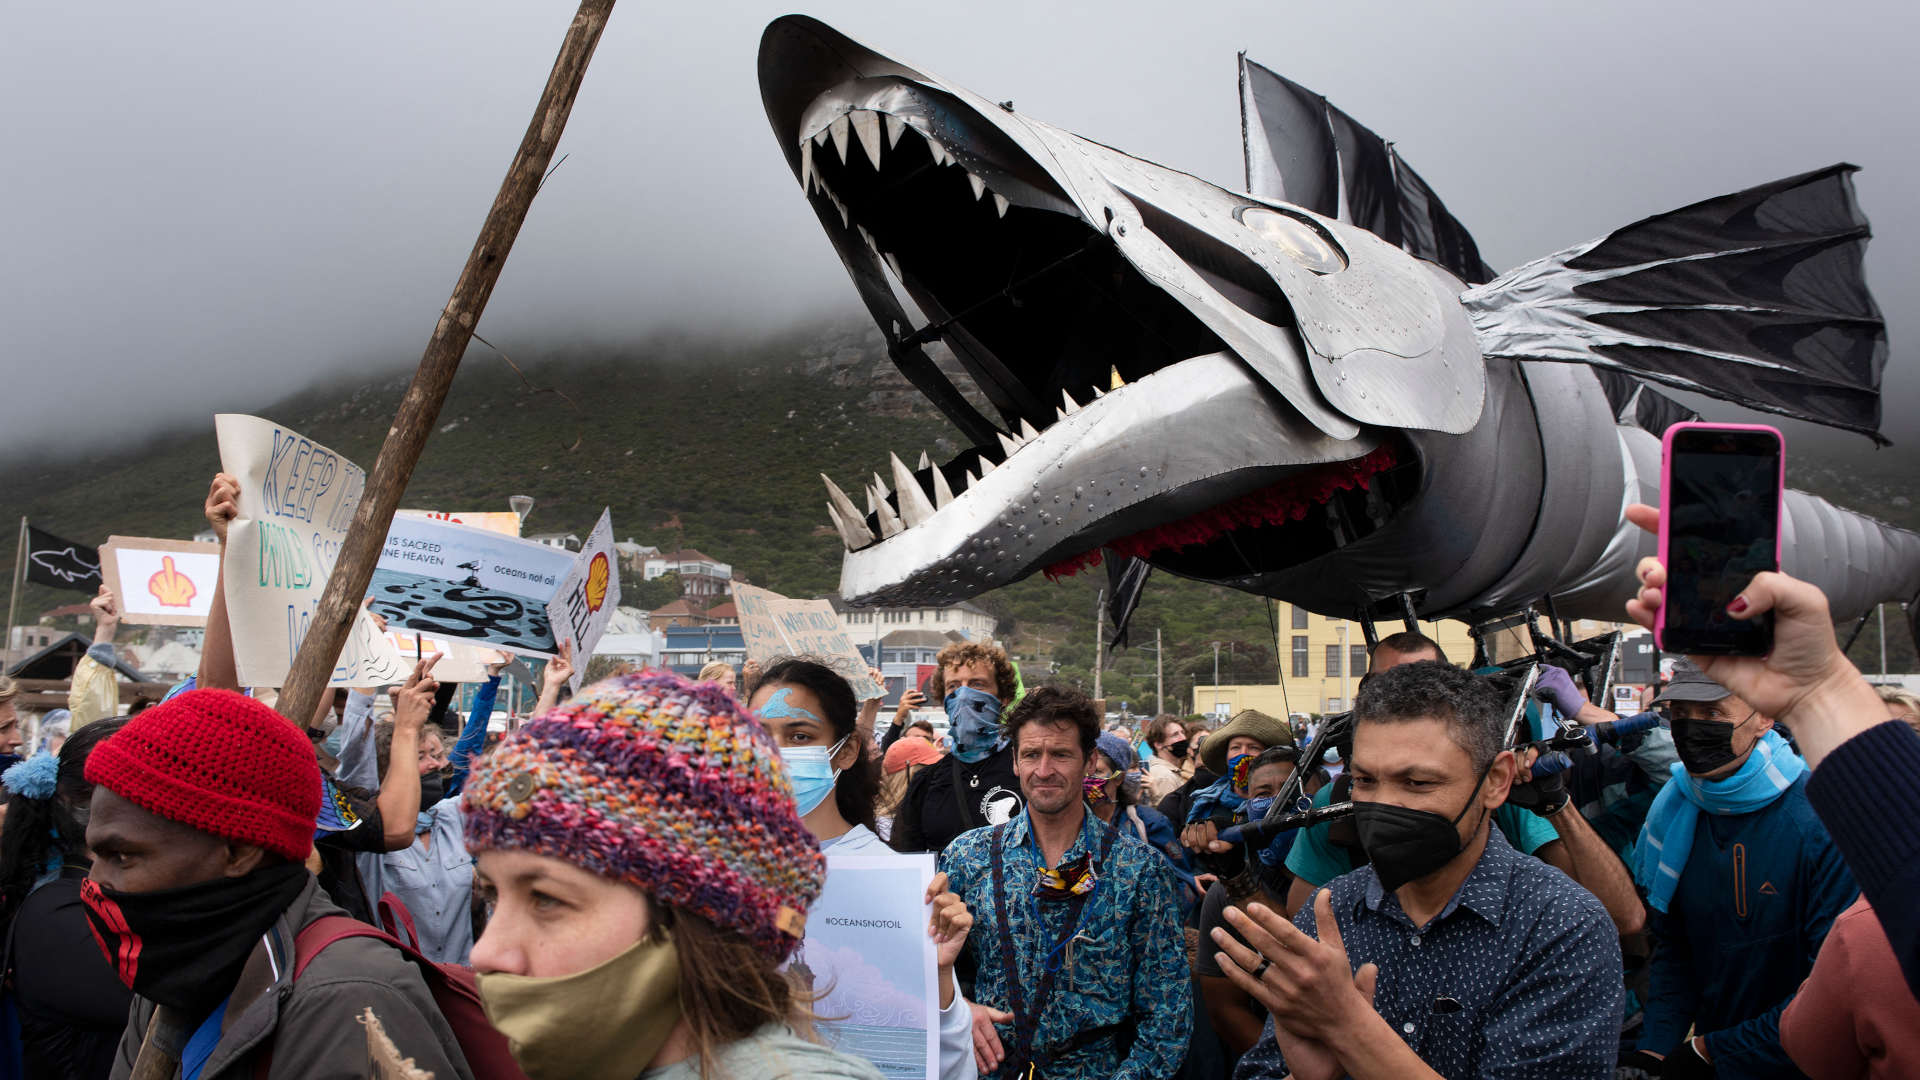 A giant puppet of a Snoek, a type of common local Mackeral, is displayed as hundreds of people take part in a December 2021 protest against Shell's plan to conduct underwater seismic surveys along South Africa's coast.